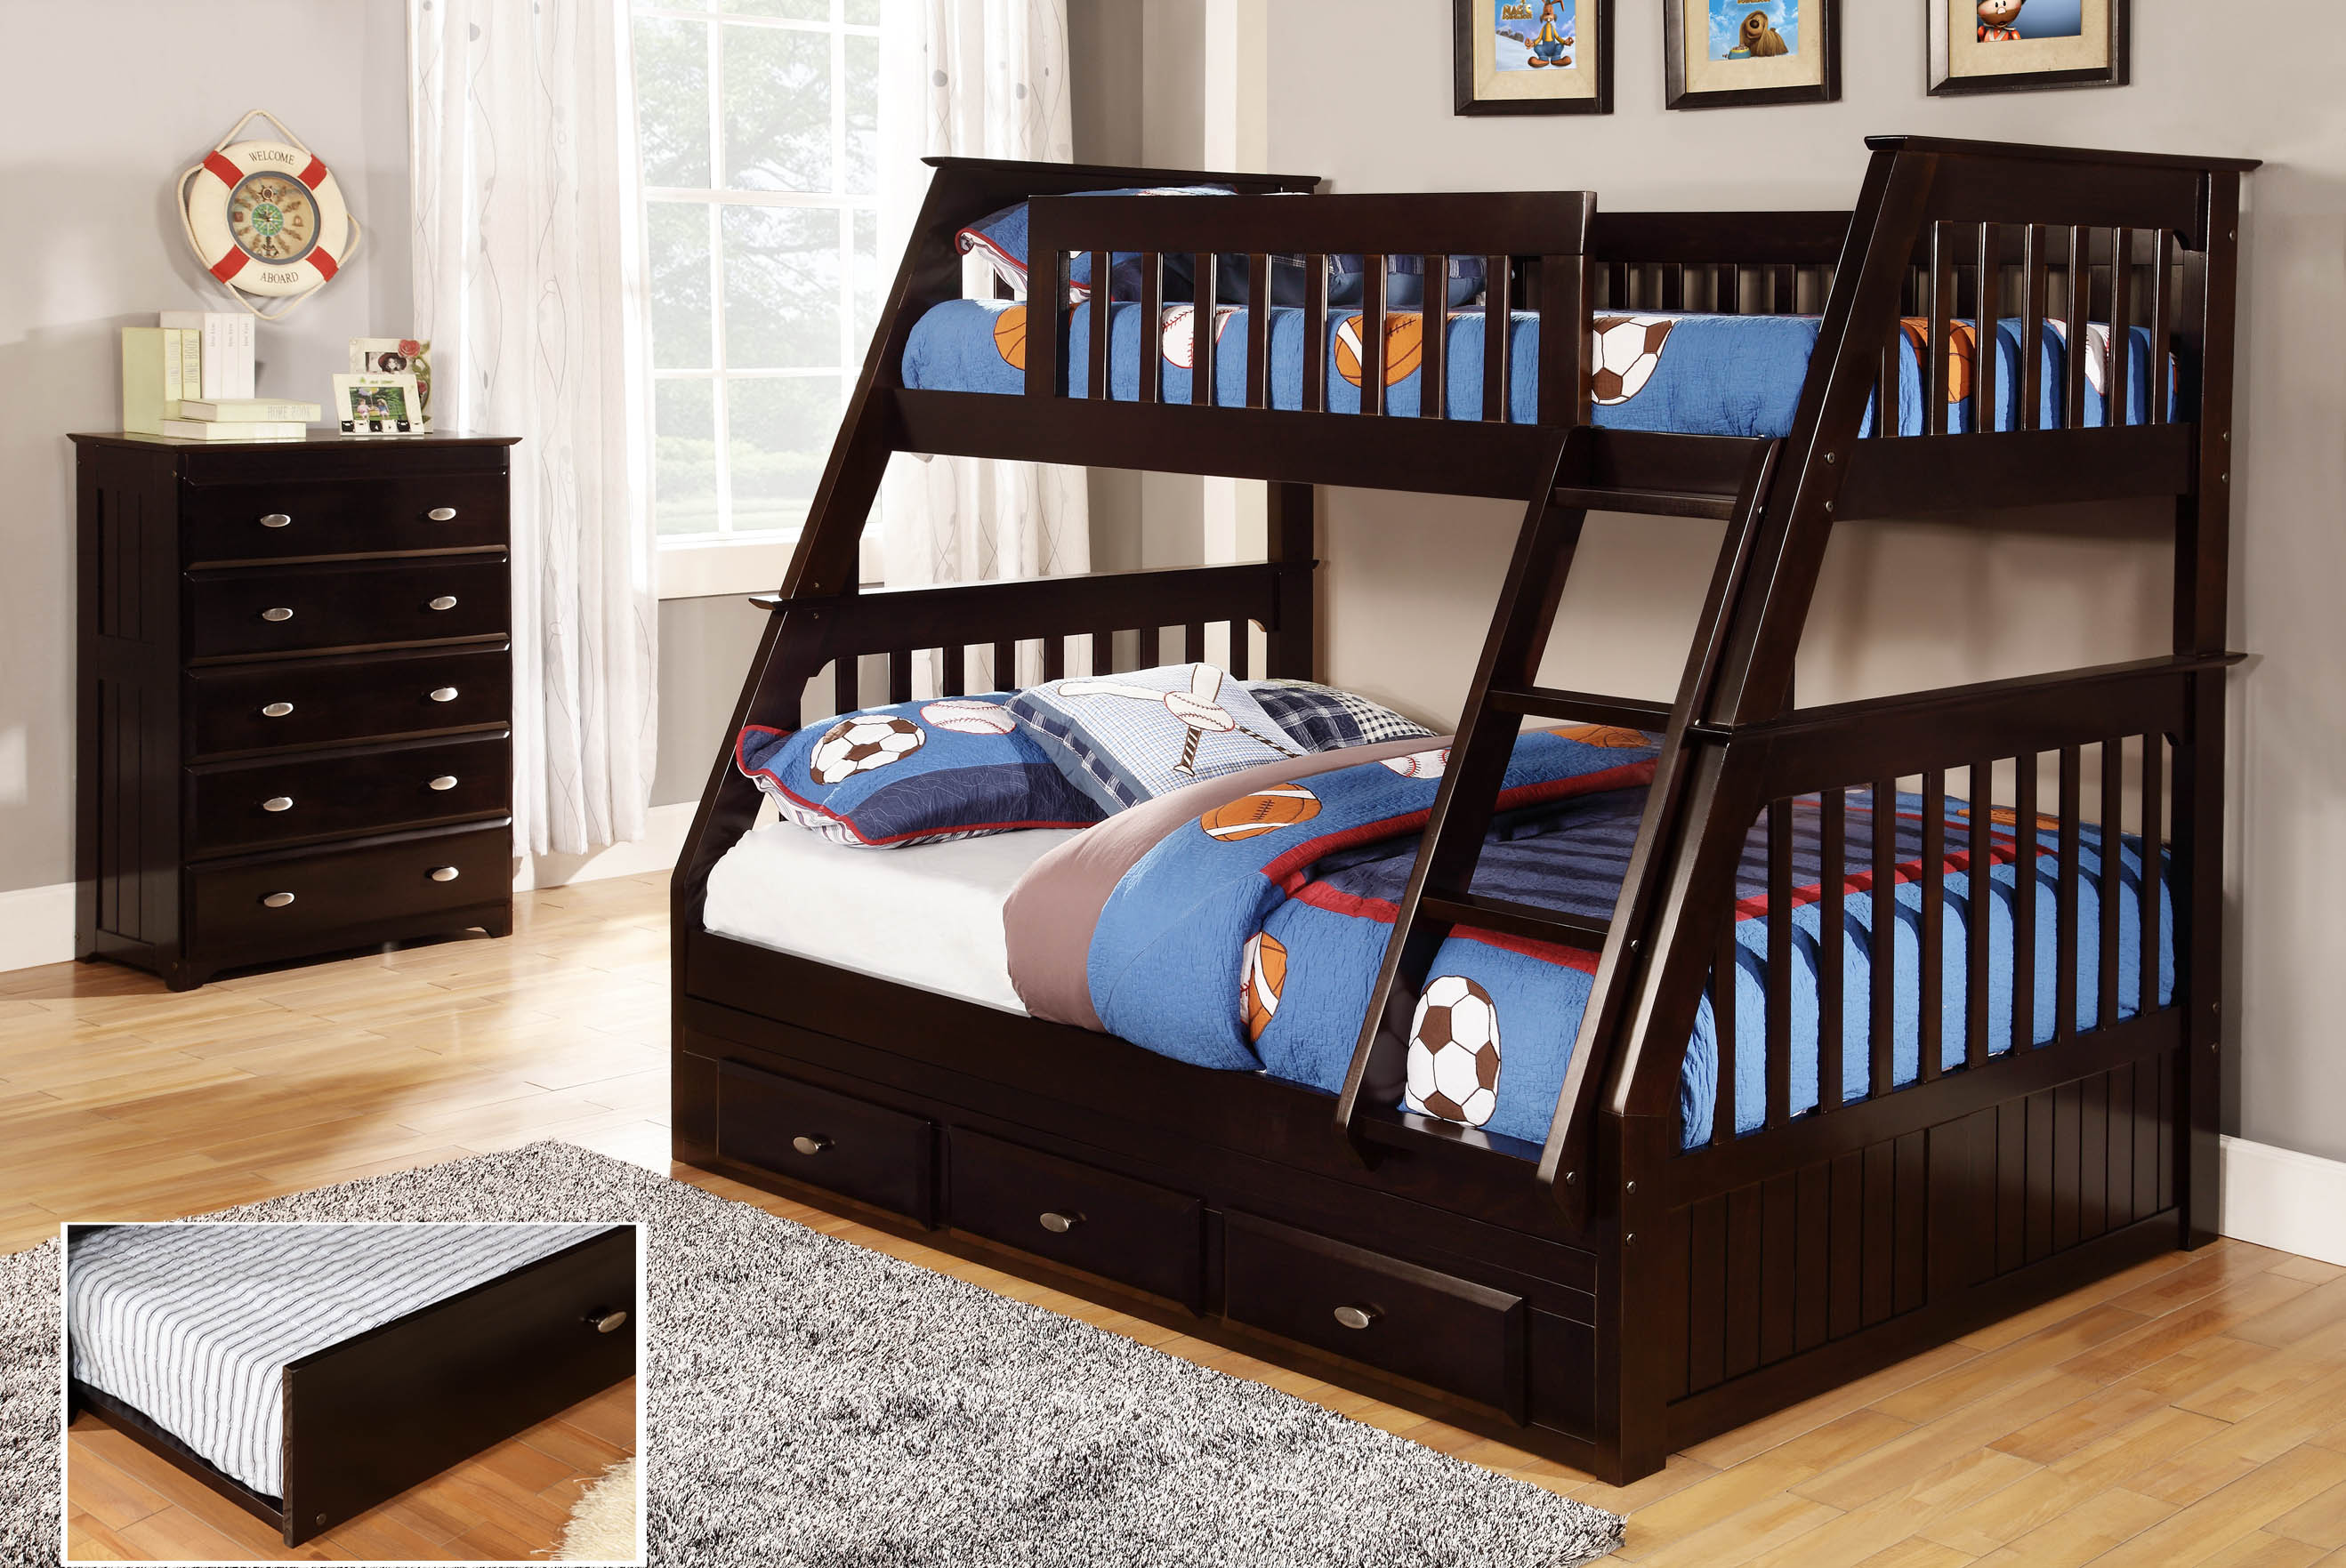 Espresso Mission Bunk Bed Kfs S, Maddox Twin Over Full Bunk Bed